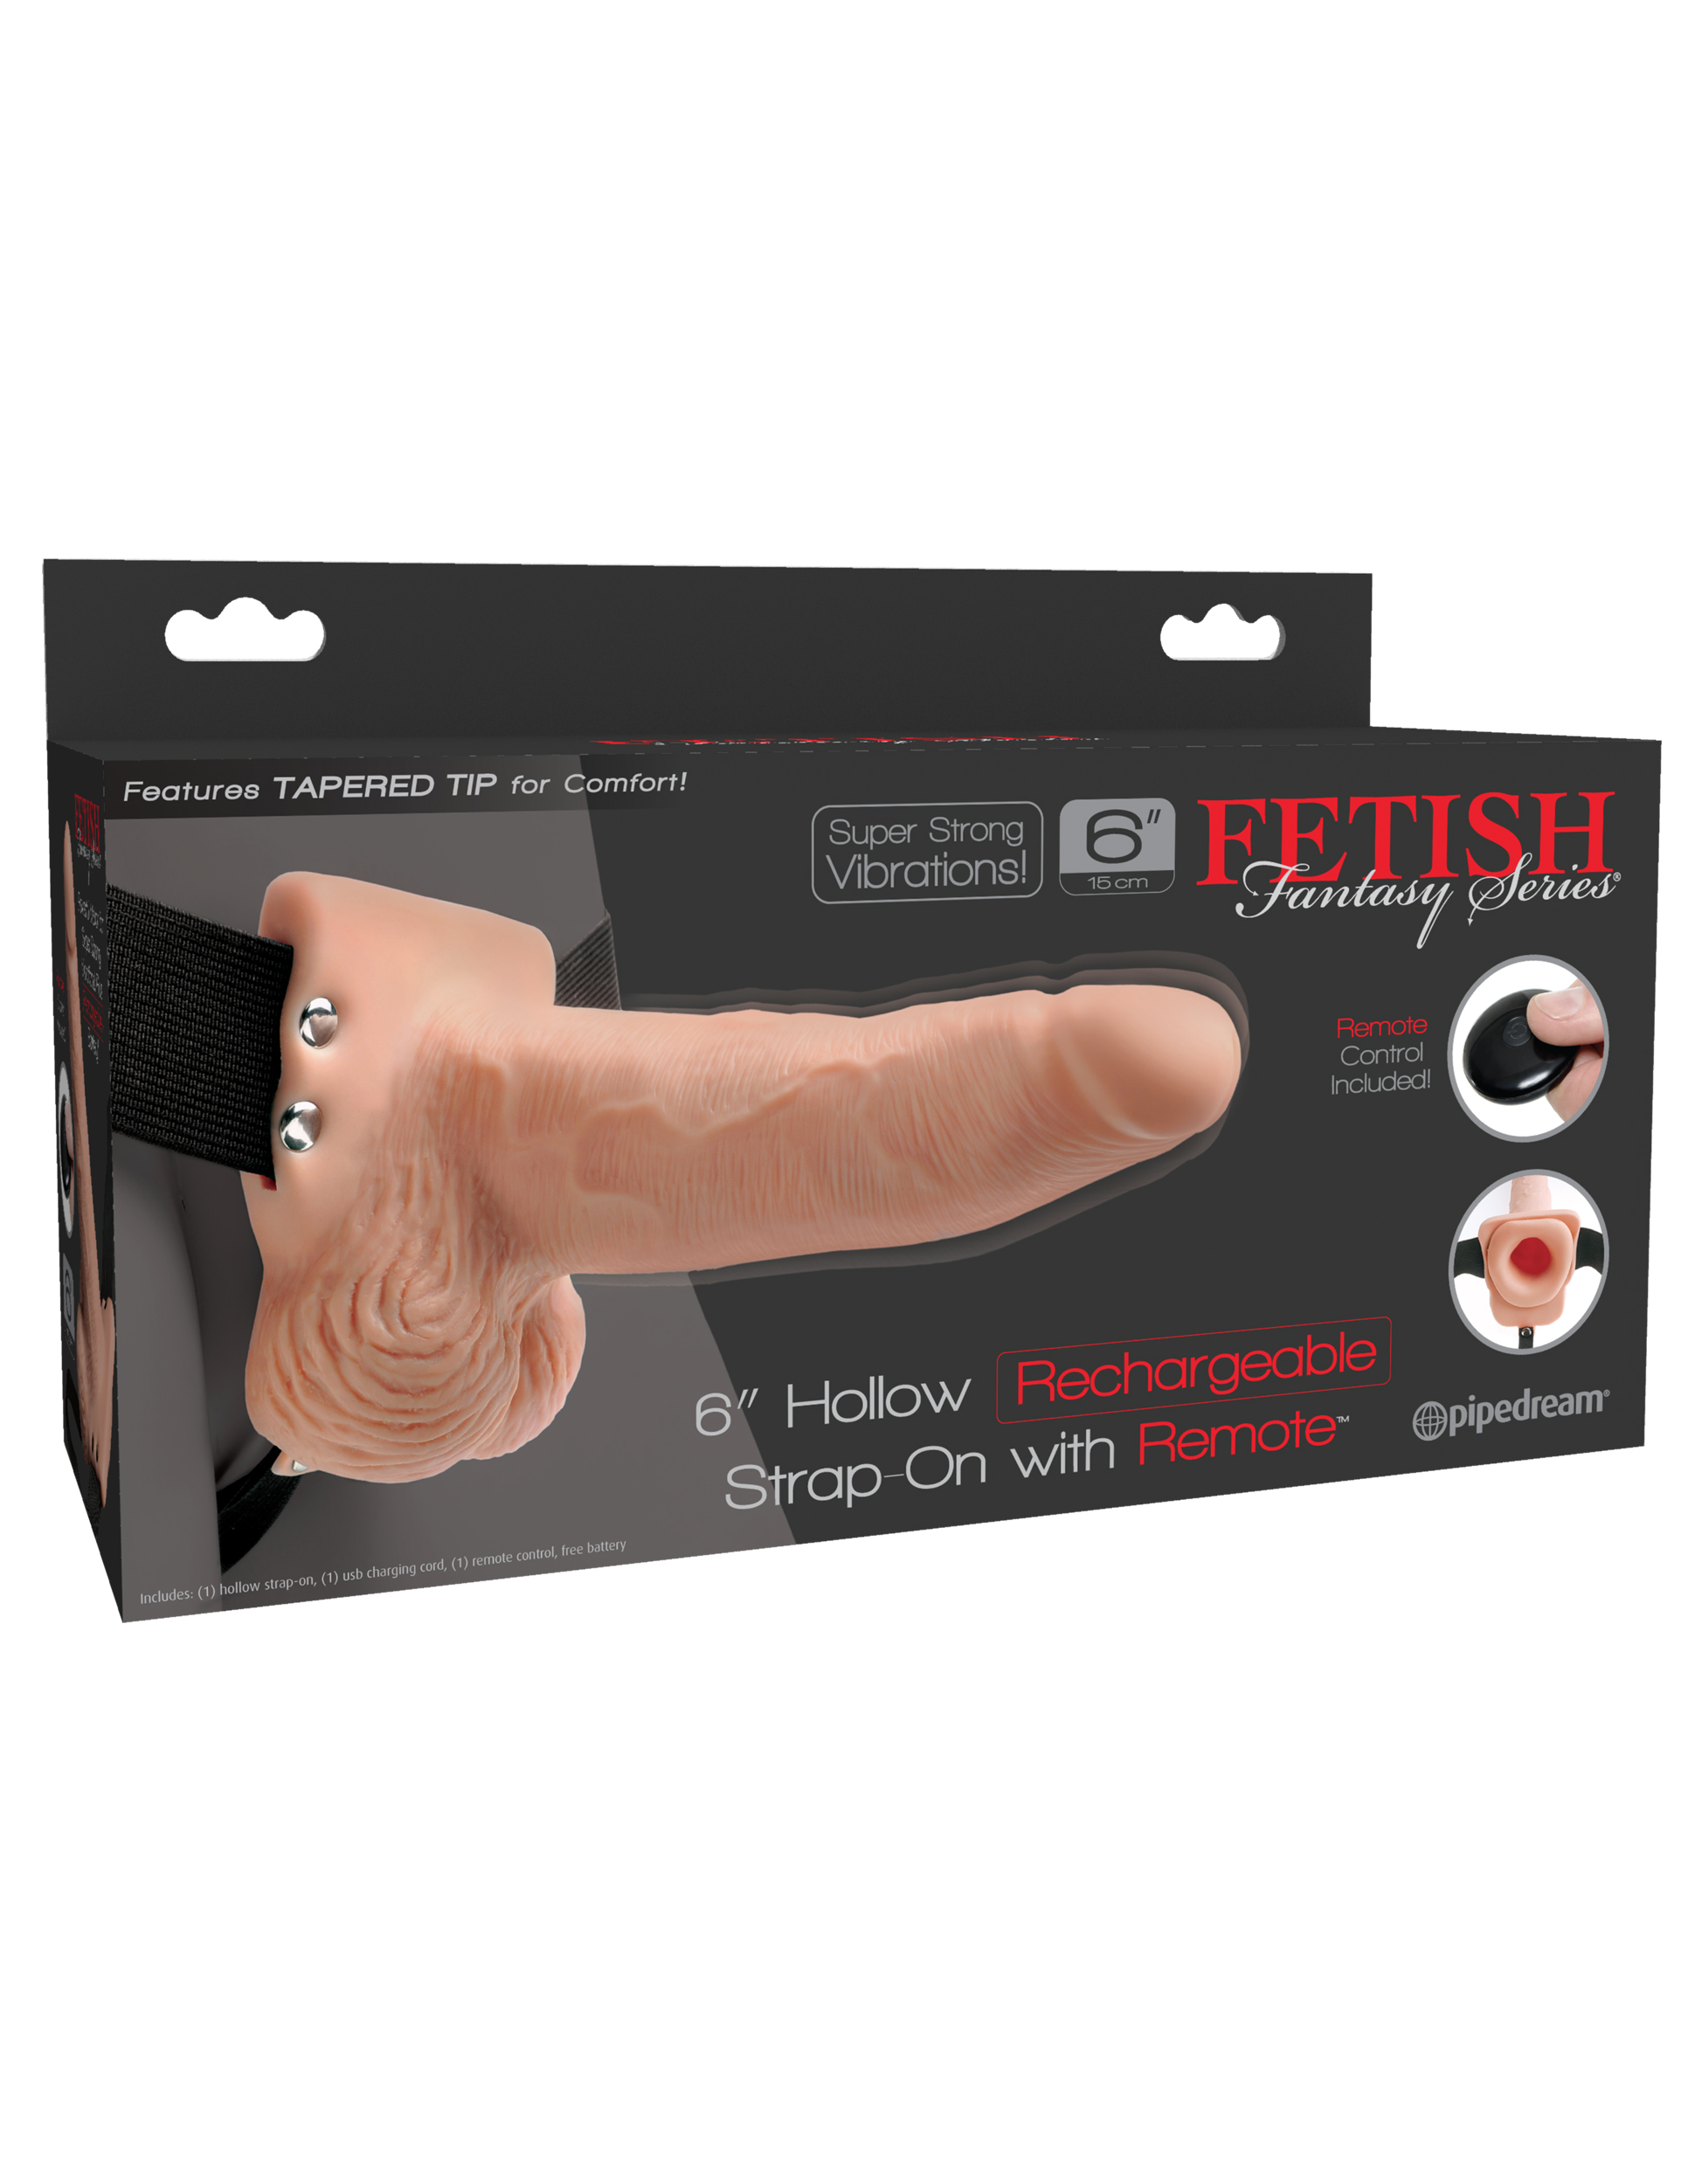 FETISH FANTASY 6 IN HOLLOW RECHARGEABLE STRAP-ON REMOTE FLESH - Click Image to Close